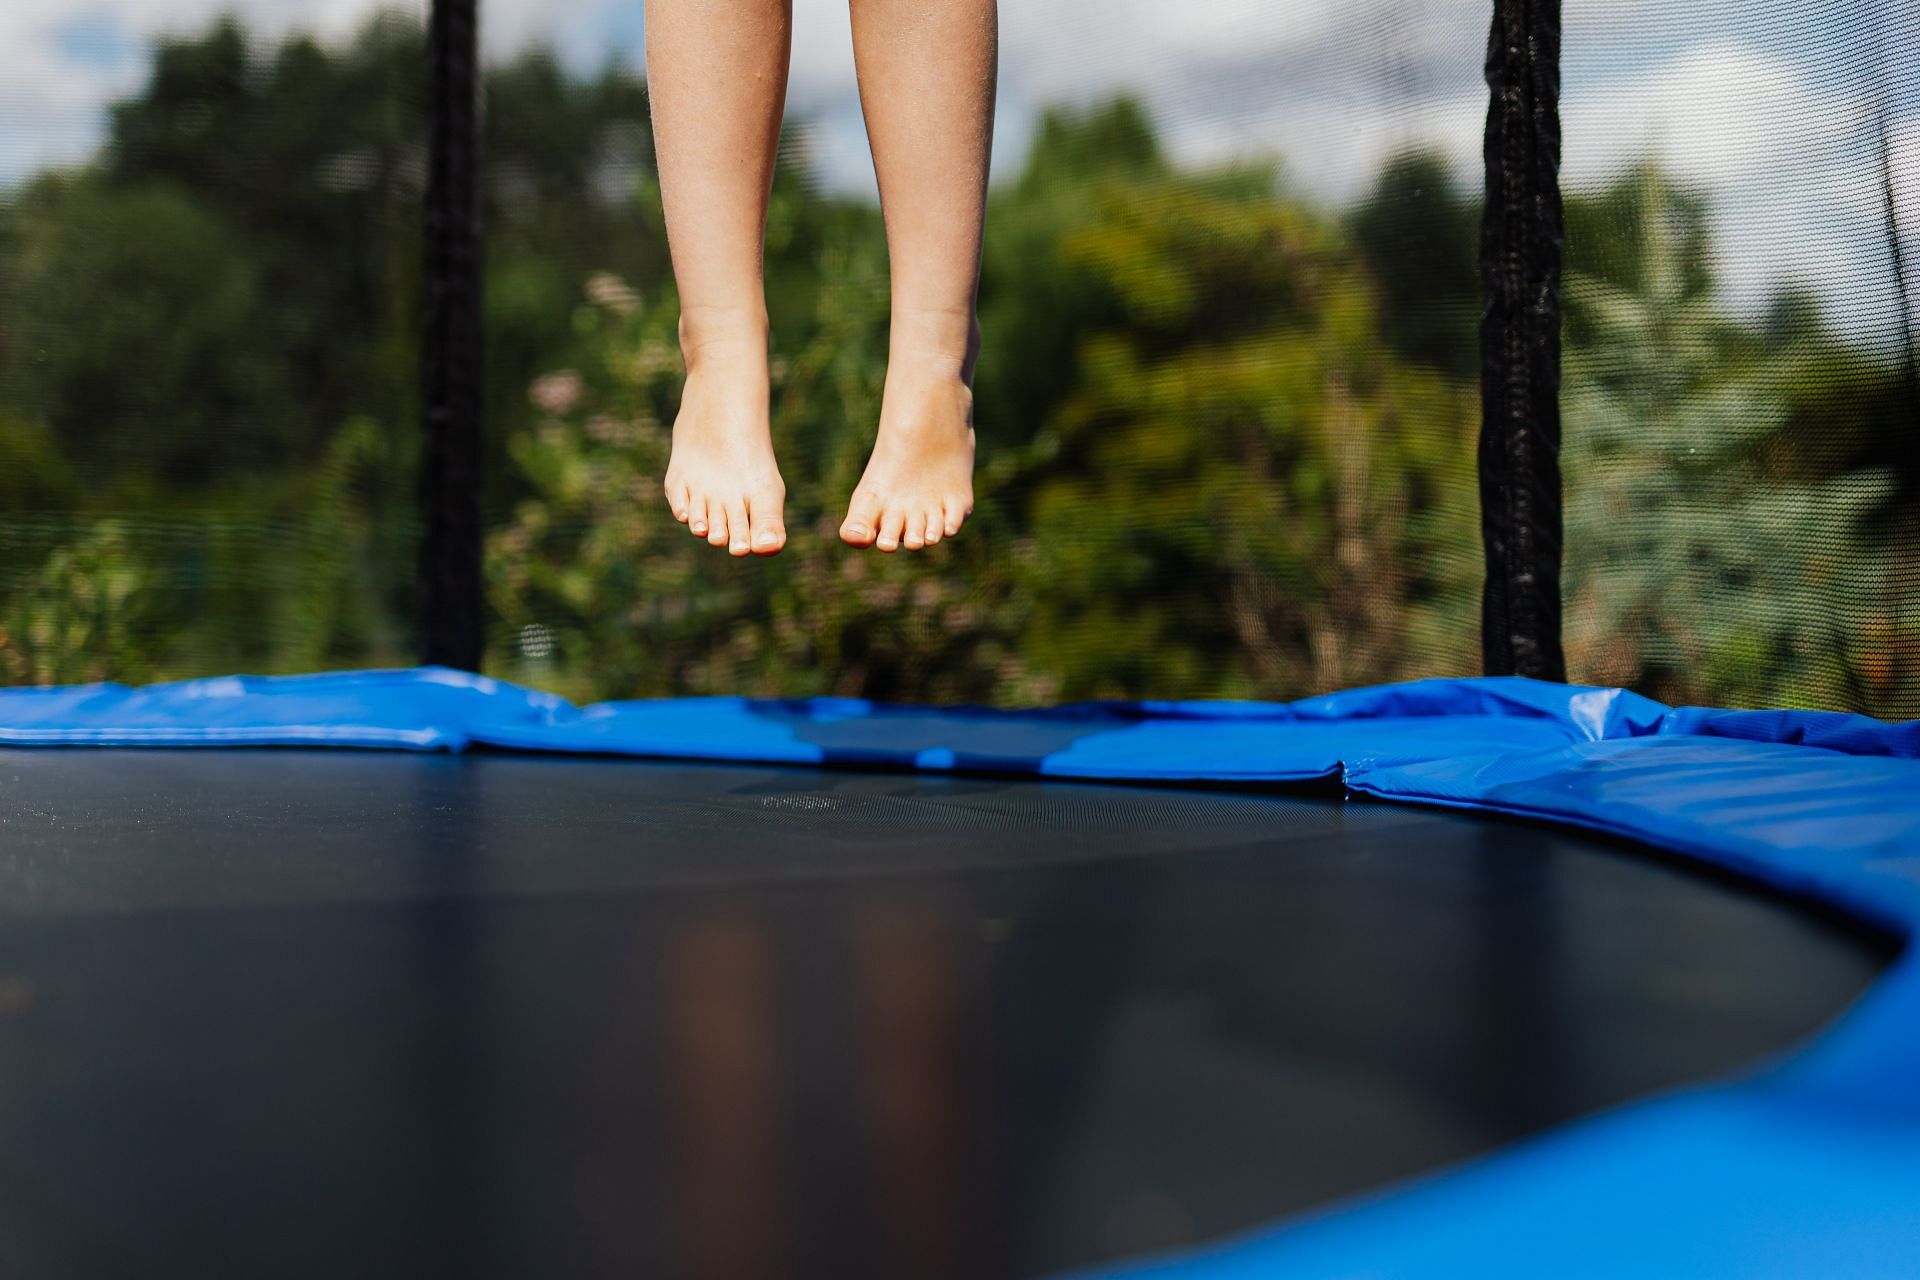 Exercising on a trampoline is a good way to get in that cardio workout (Image via Pexels @Karolina Grabowska)